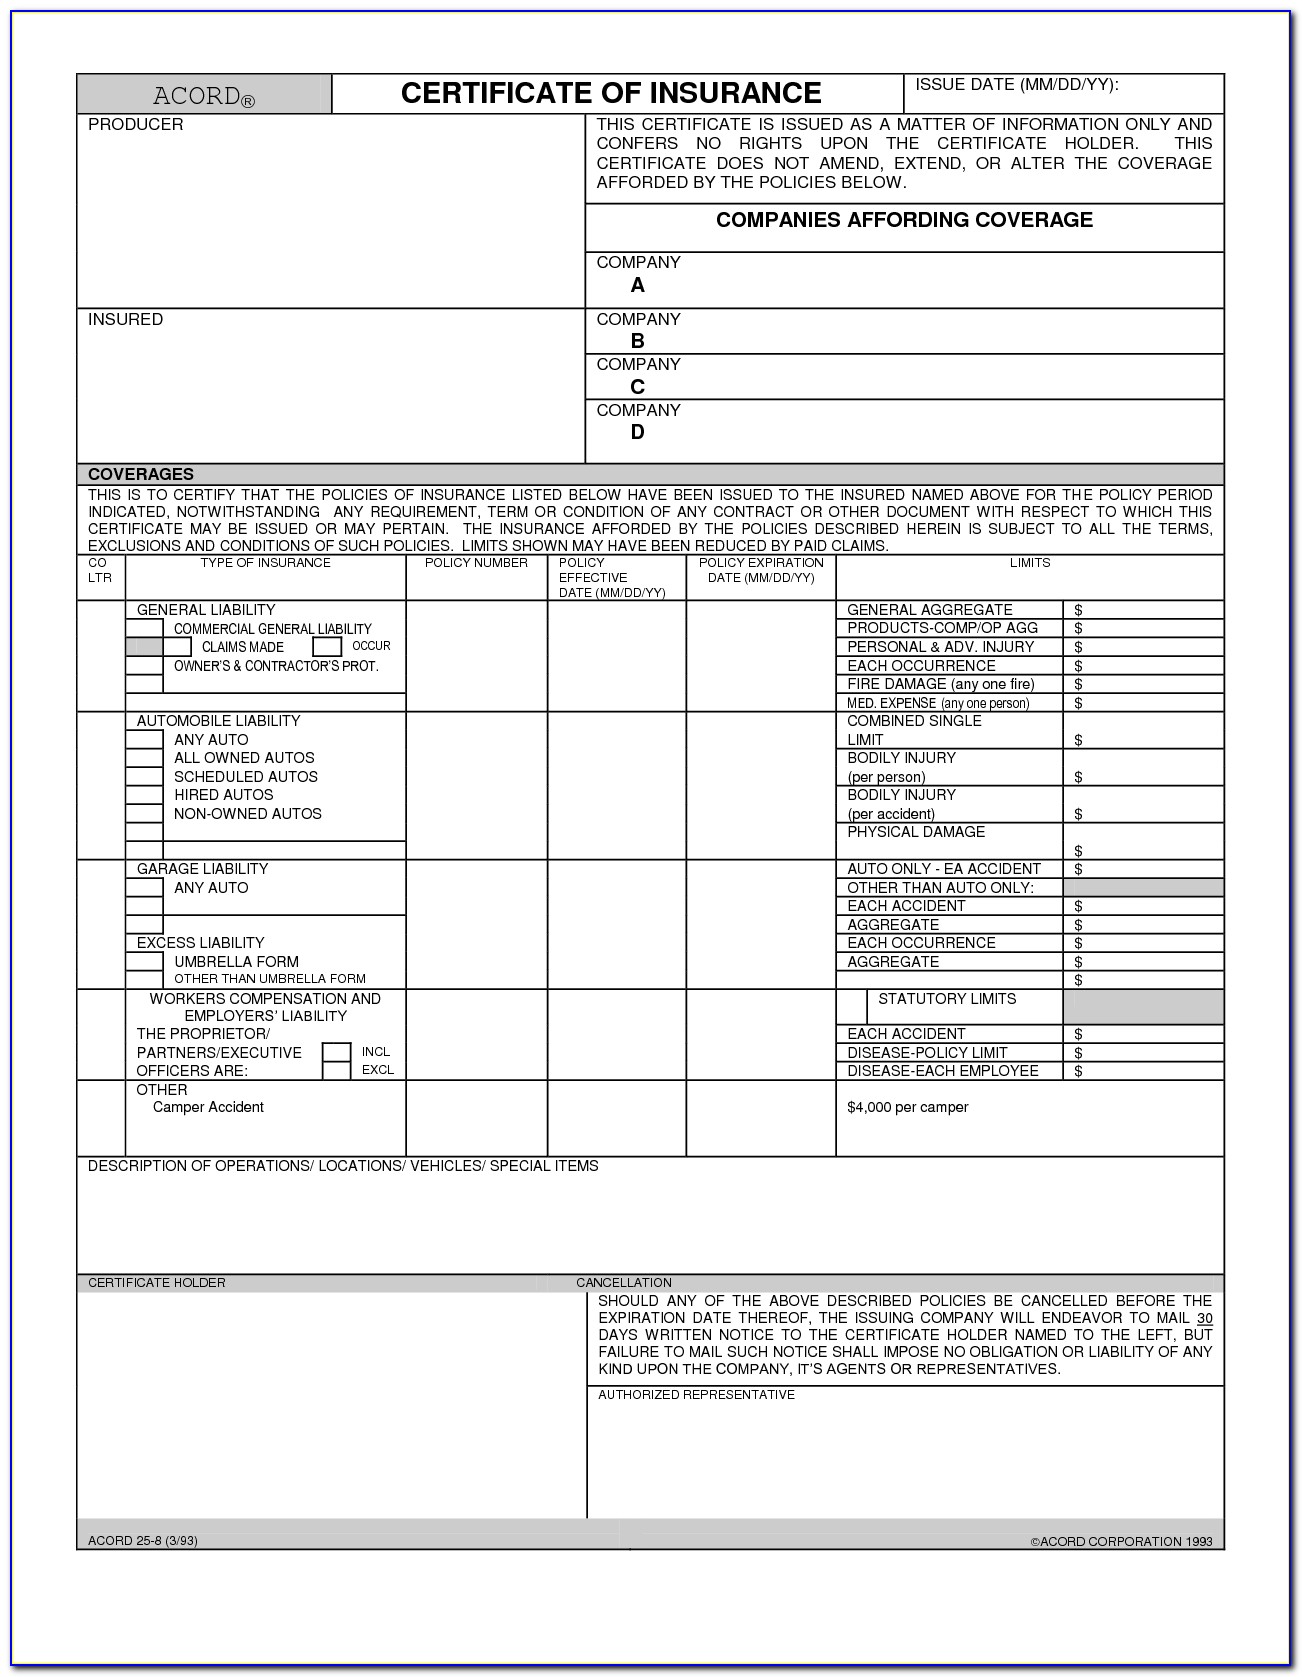 Acord 25 Insurance Form